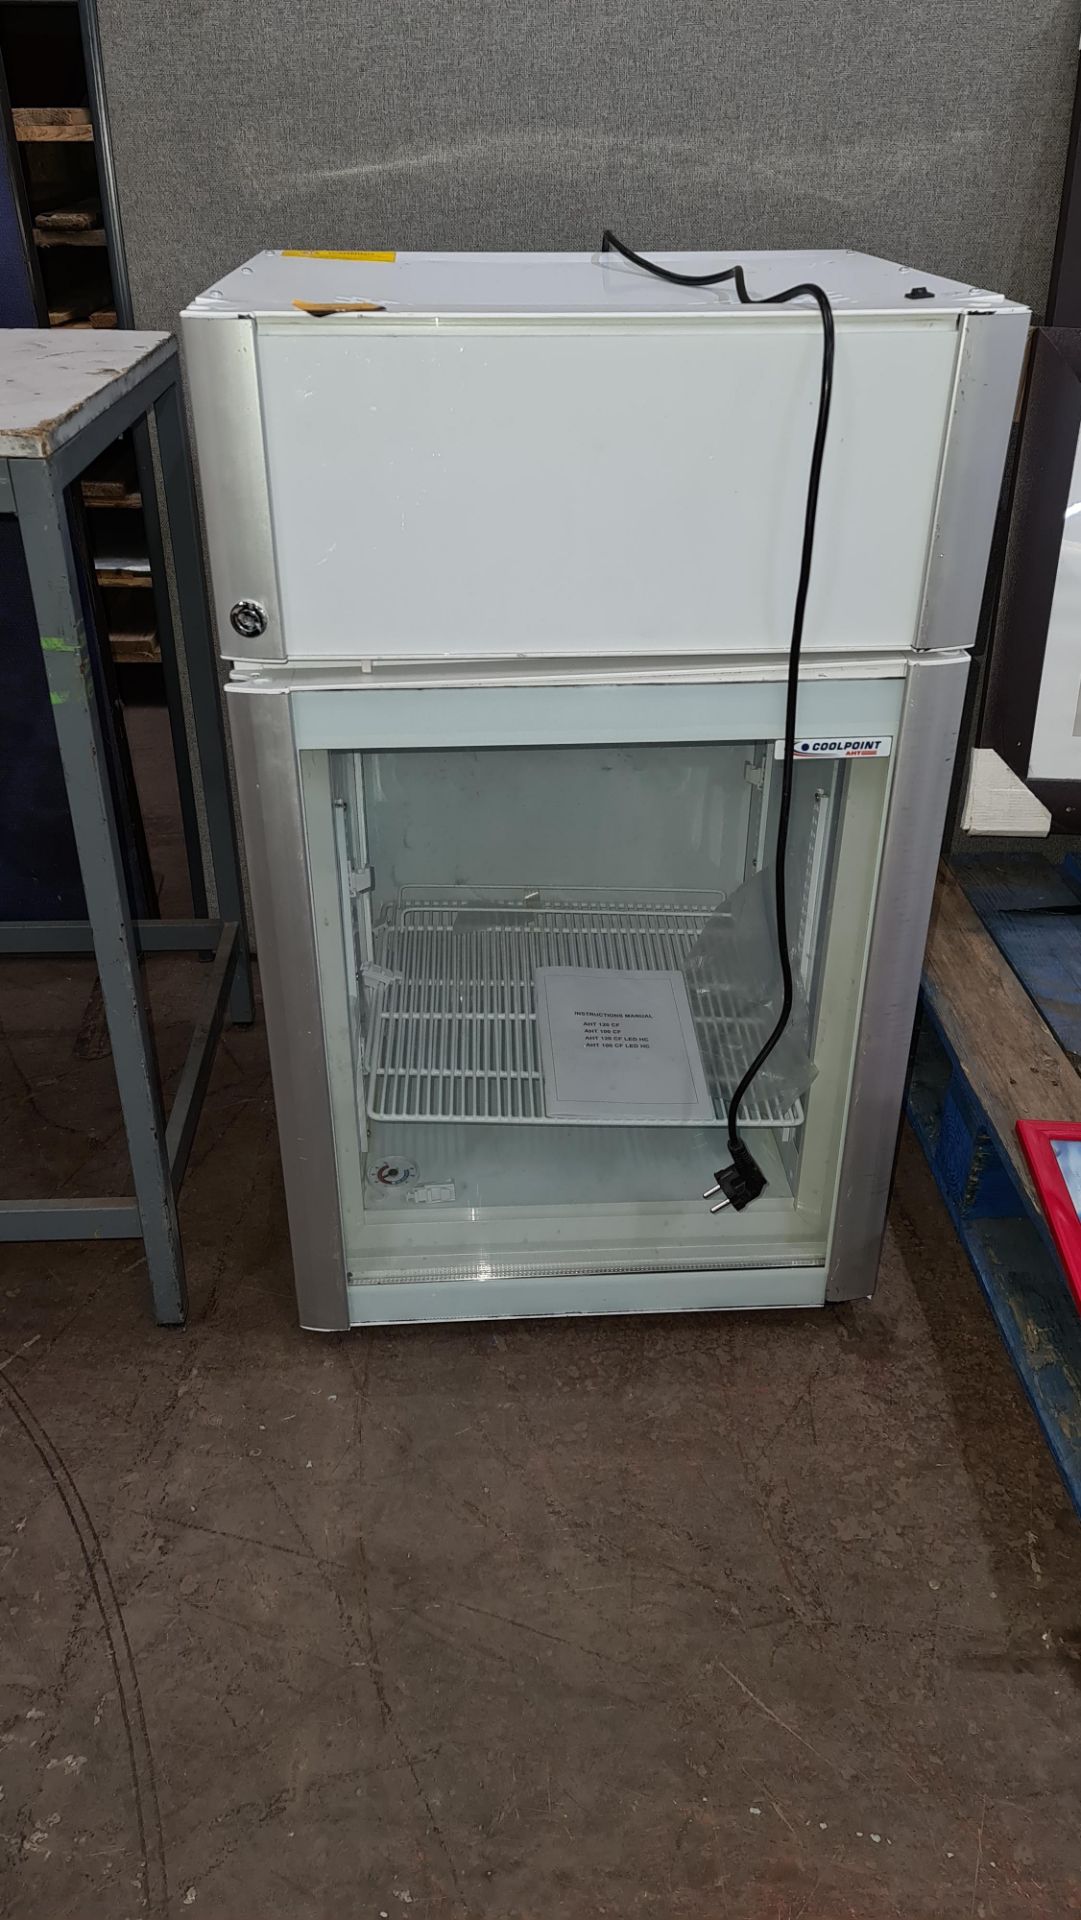 Coolpoint clear fronted fridge model AHT100 - Image 3 of 6